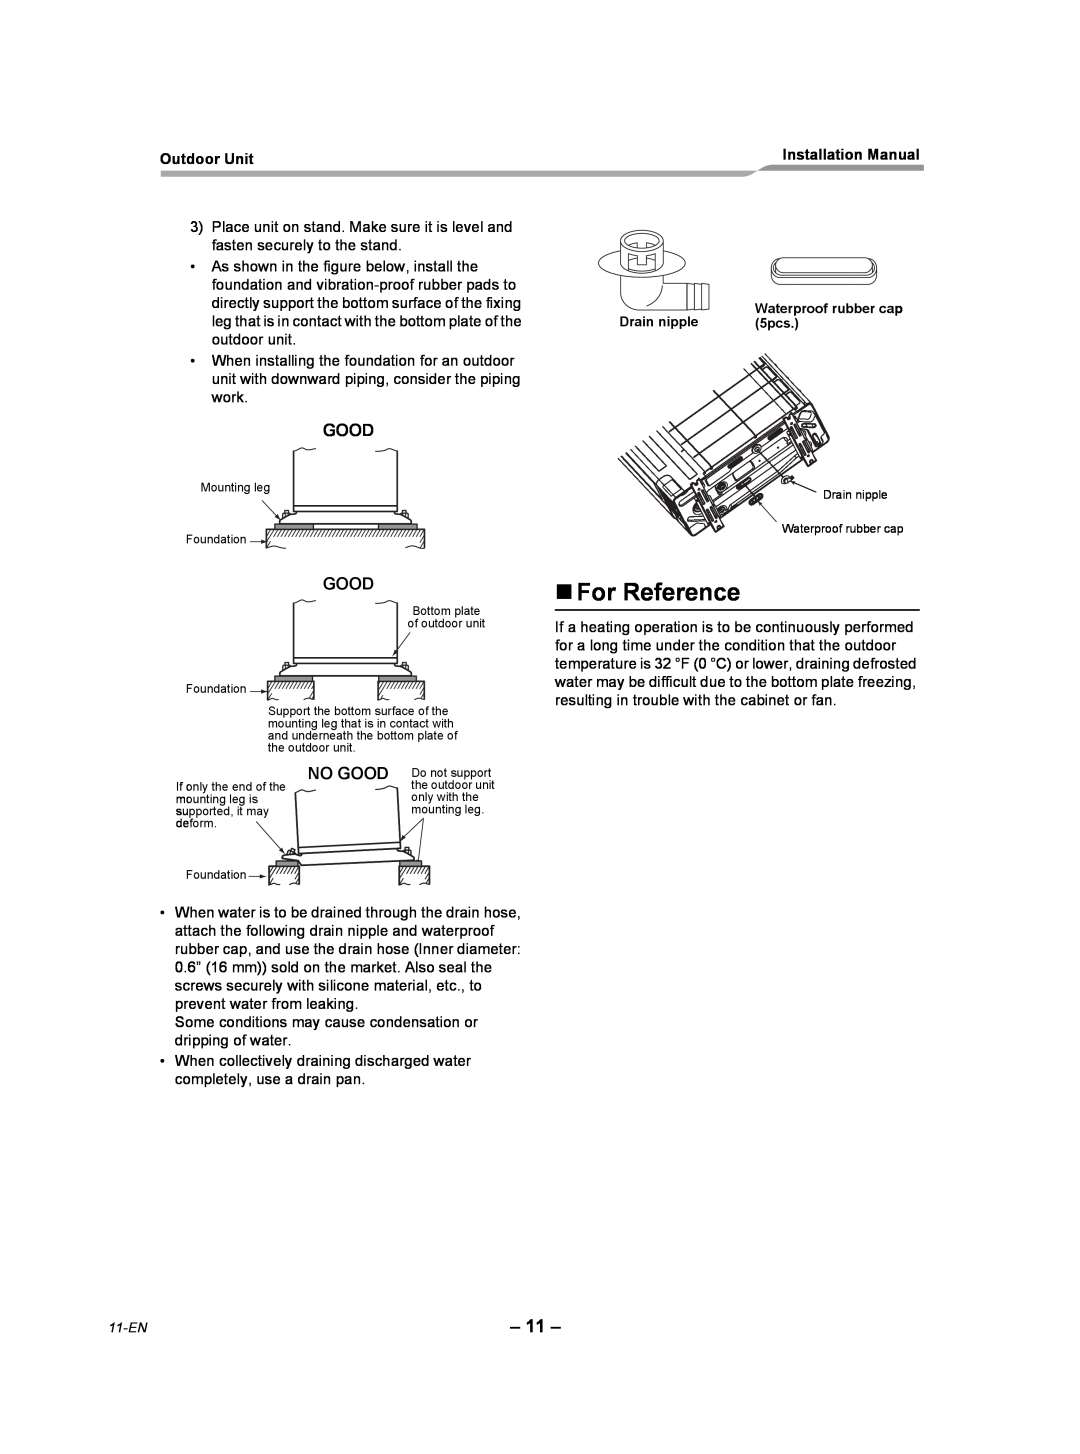 Toshiba RAV-SP360AT2-UL, RAV-SP300AT2-UL, RAV-SP420AT2-UL installation manual „For Reference, No Good 